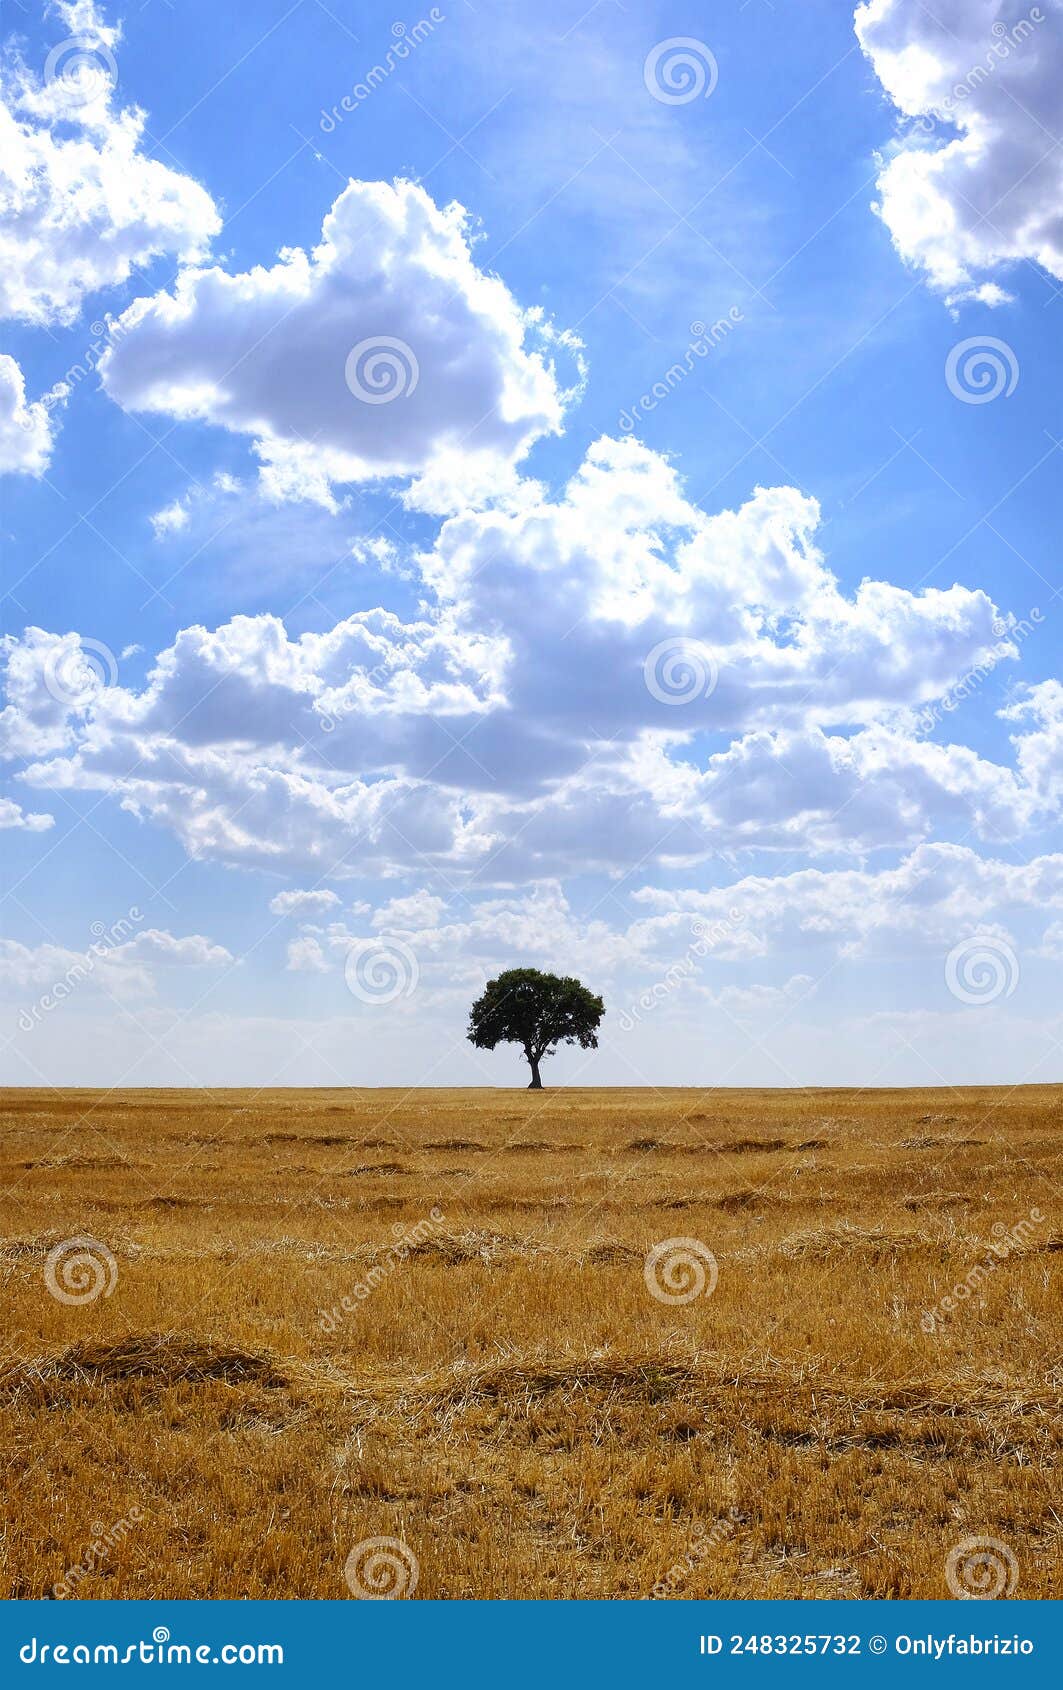 tree in an harvested wheat field